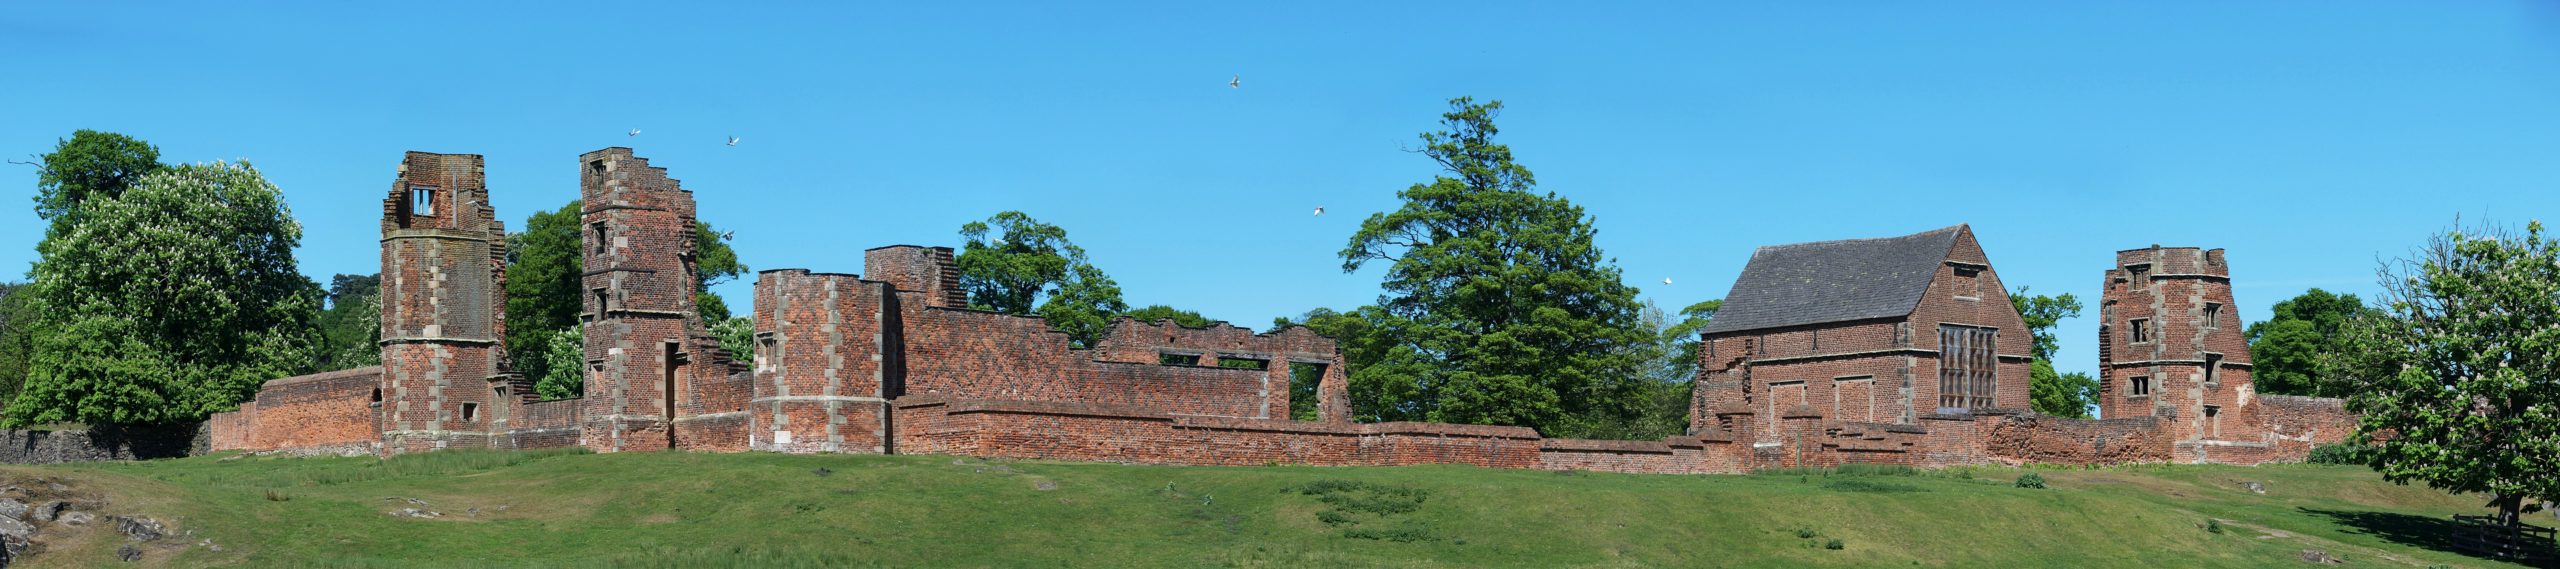 Bradgate House & The Murderous Ambition of a Tudor Family